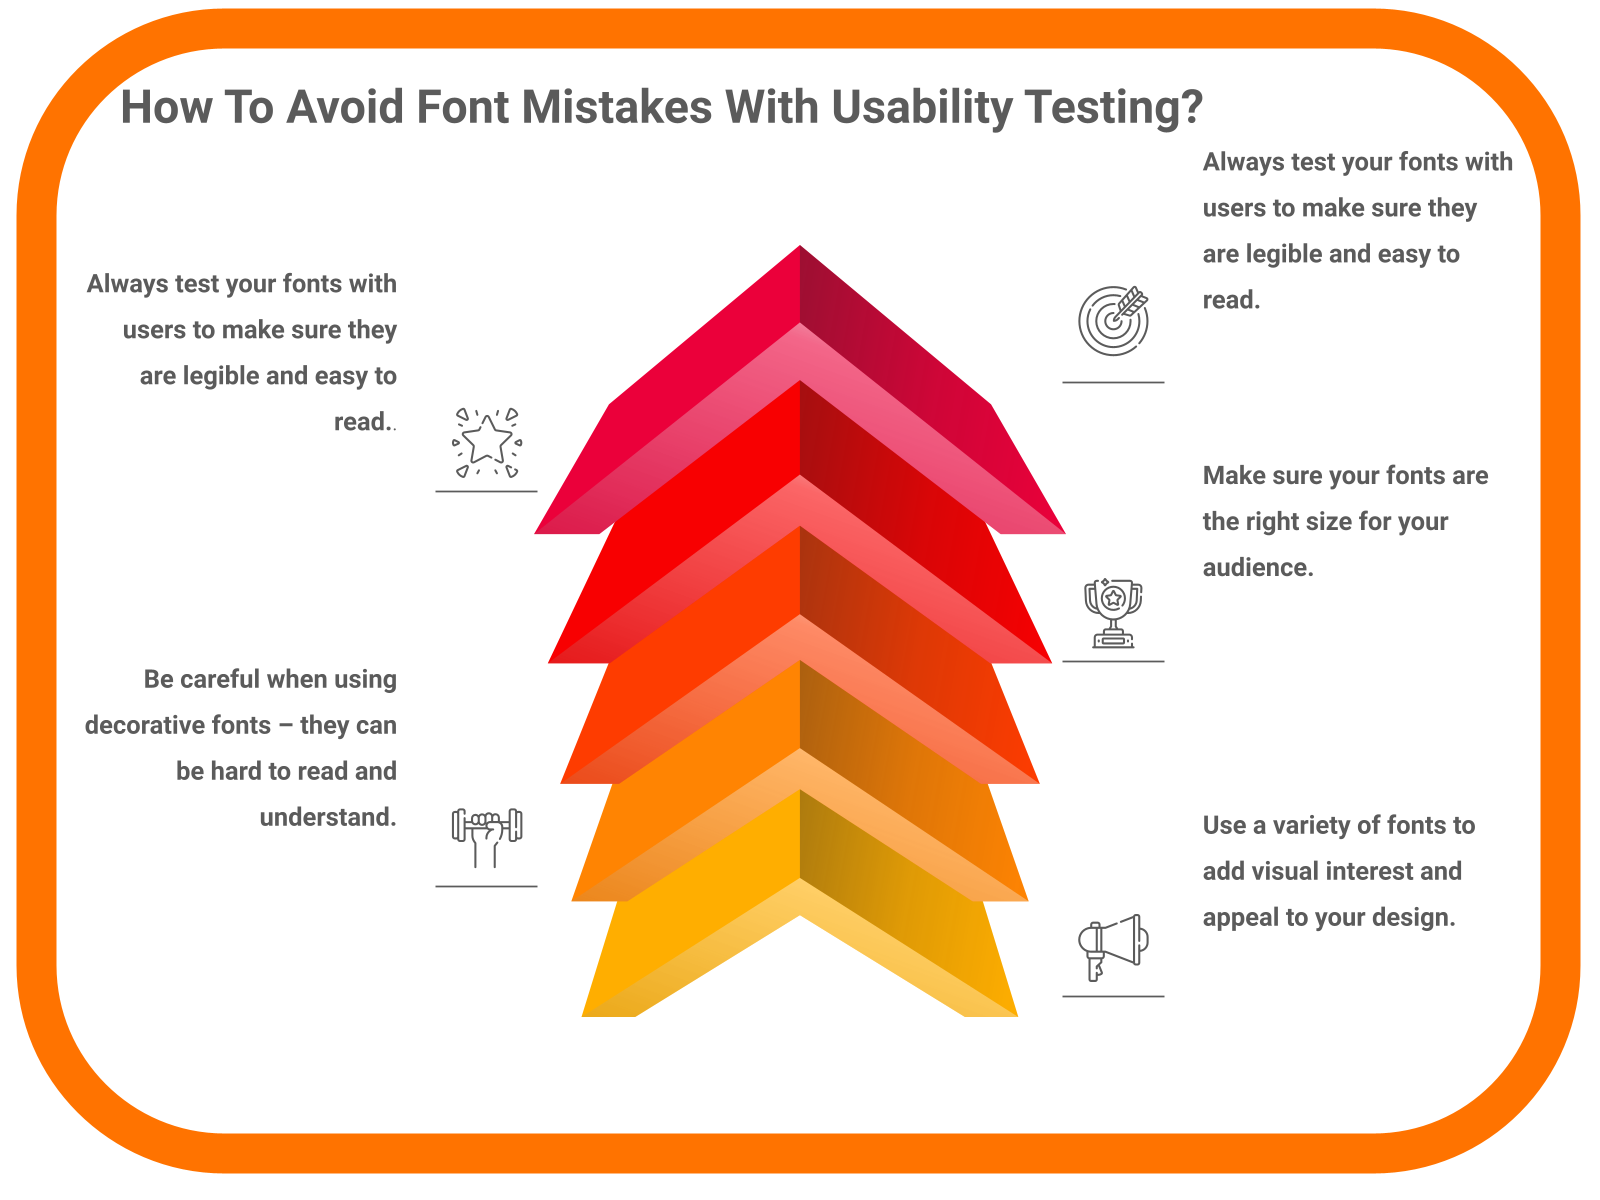 How To Avoid Font Mistakes With Usability Testing?